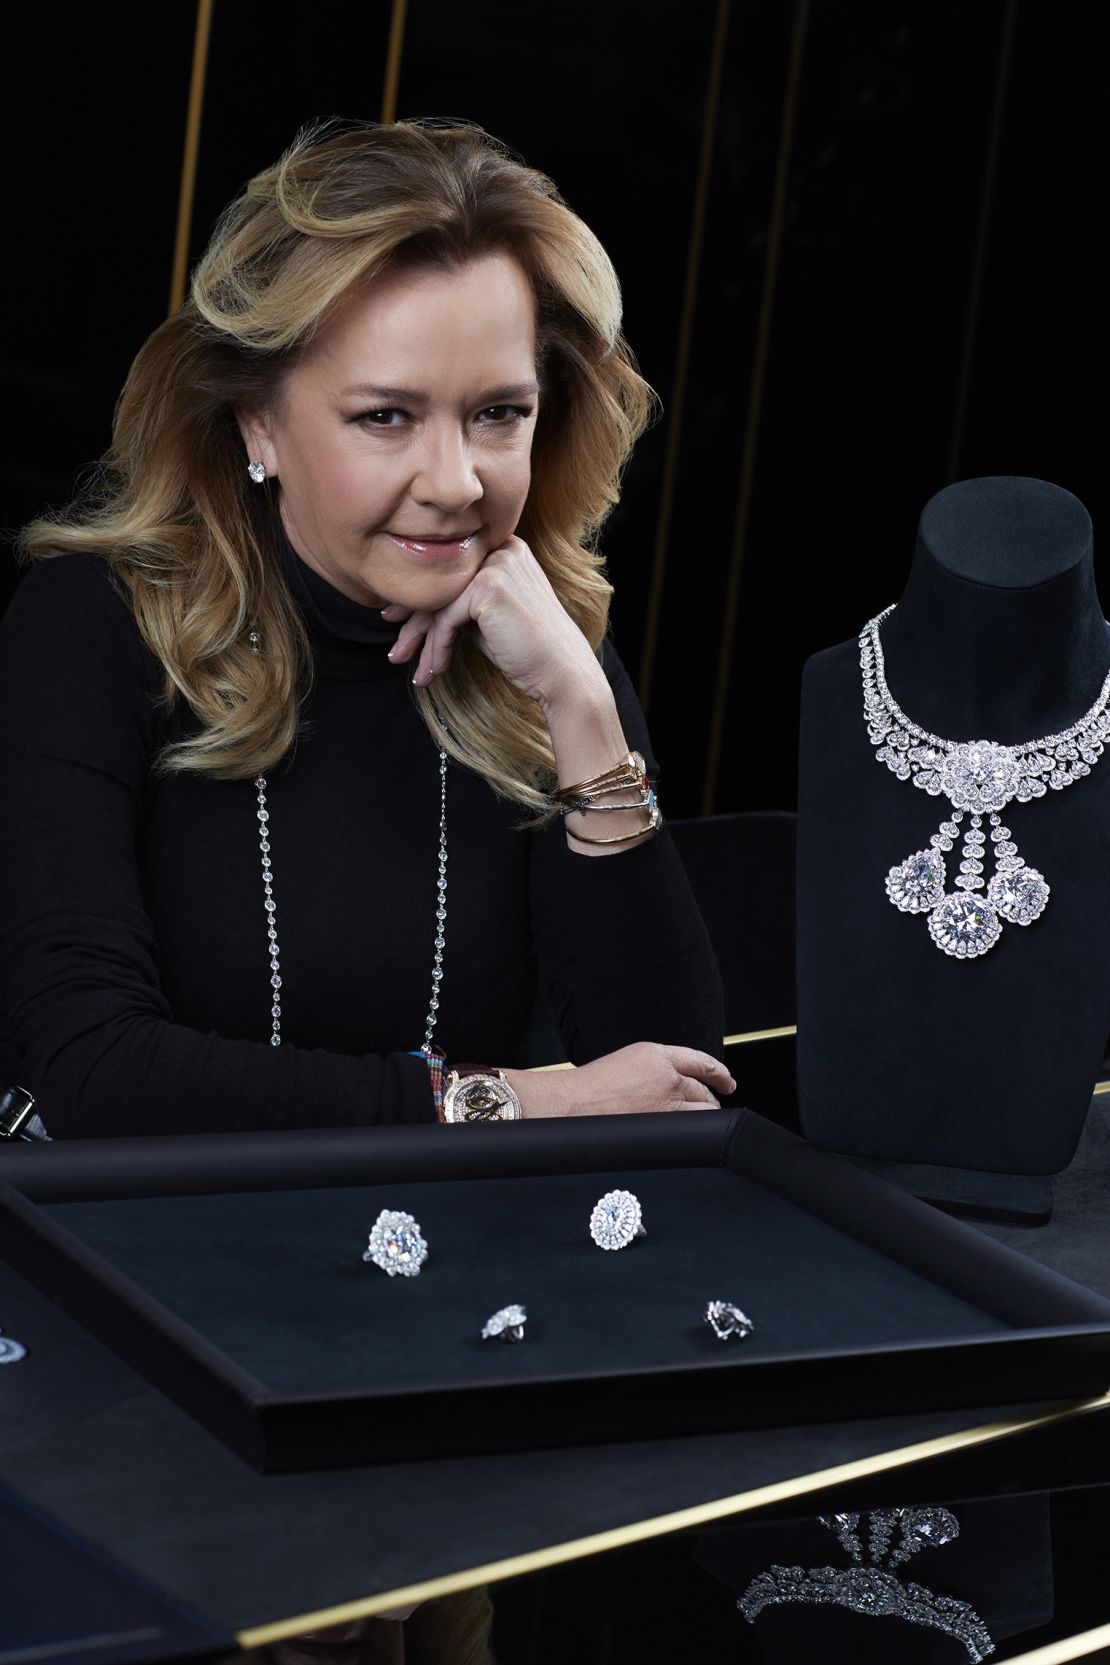 Chopard co-president and artistic director Caroline Scheufele says she still "gets goose bumps" seeing the suite of gems she created from a 342-carat rough that produced 23 diamonds
